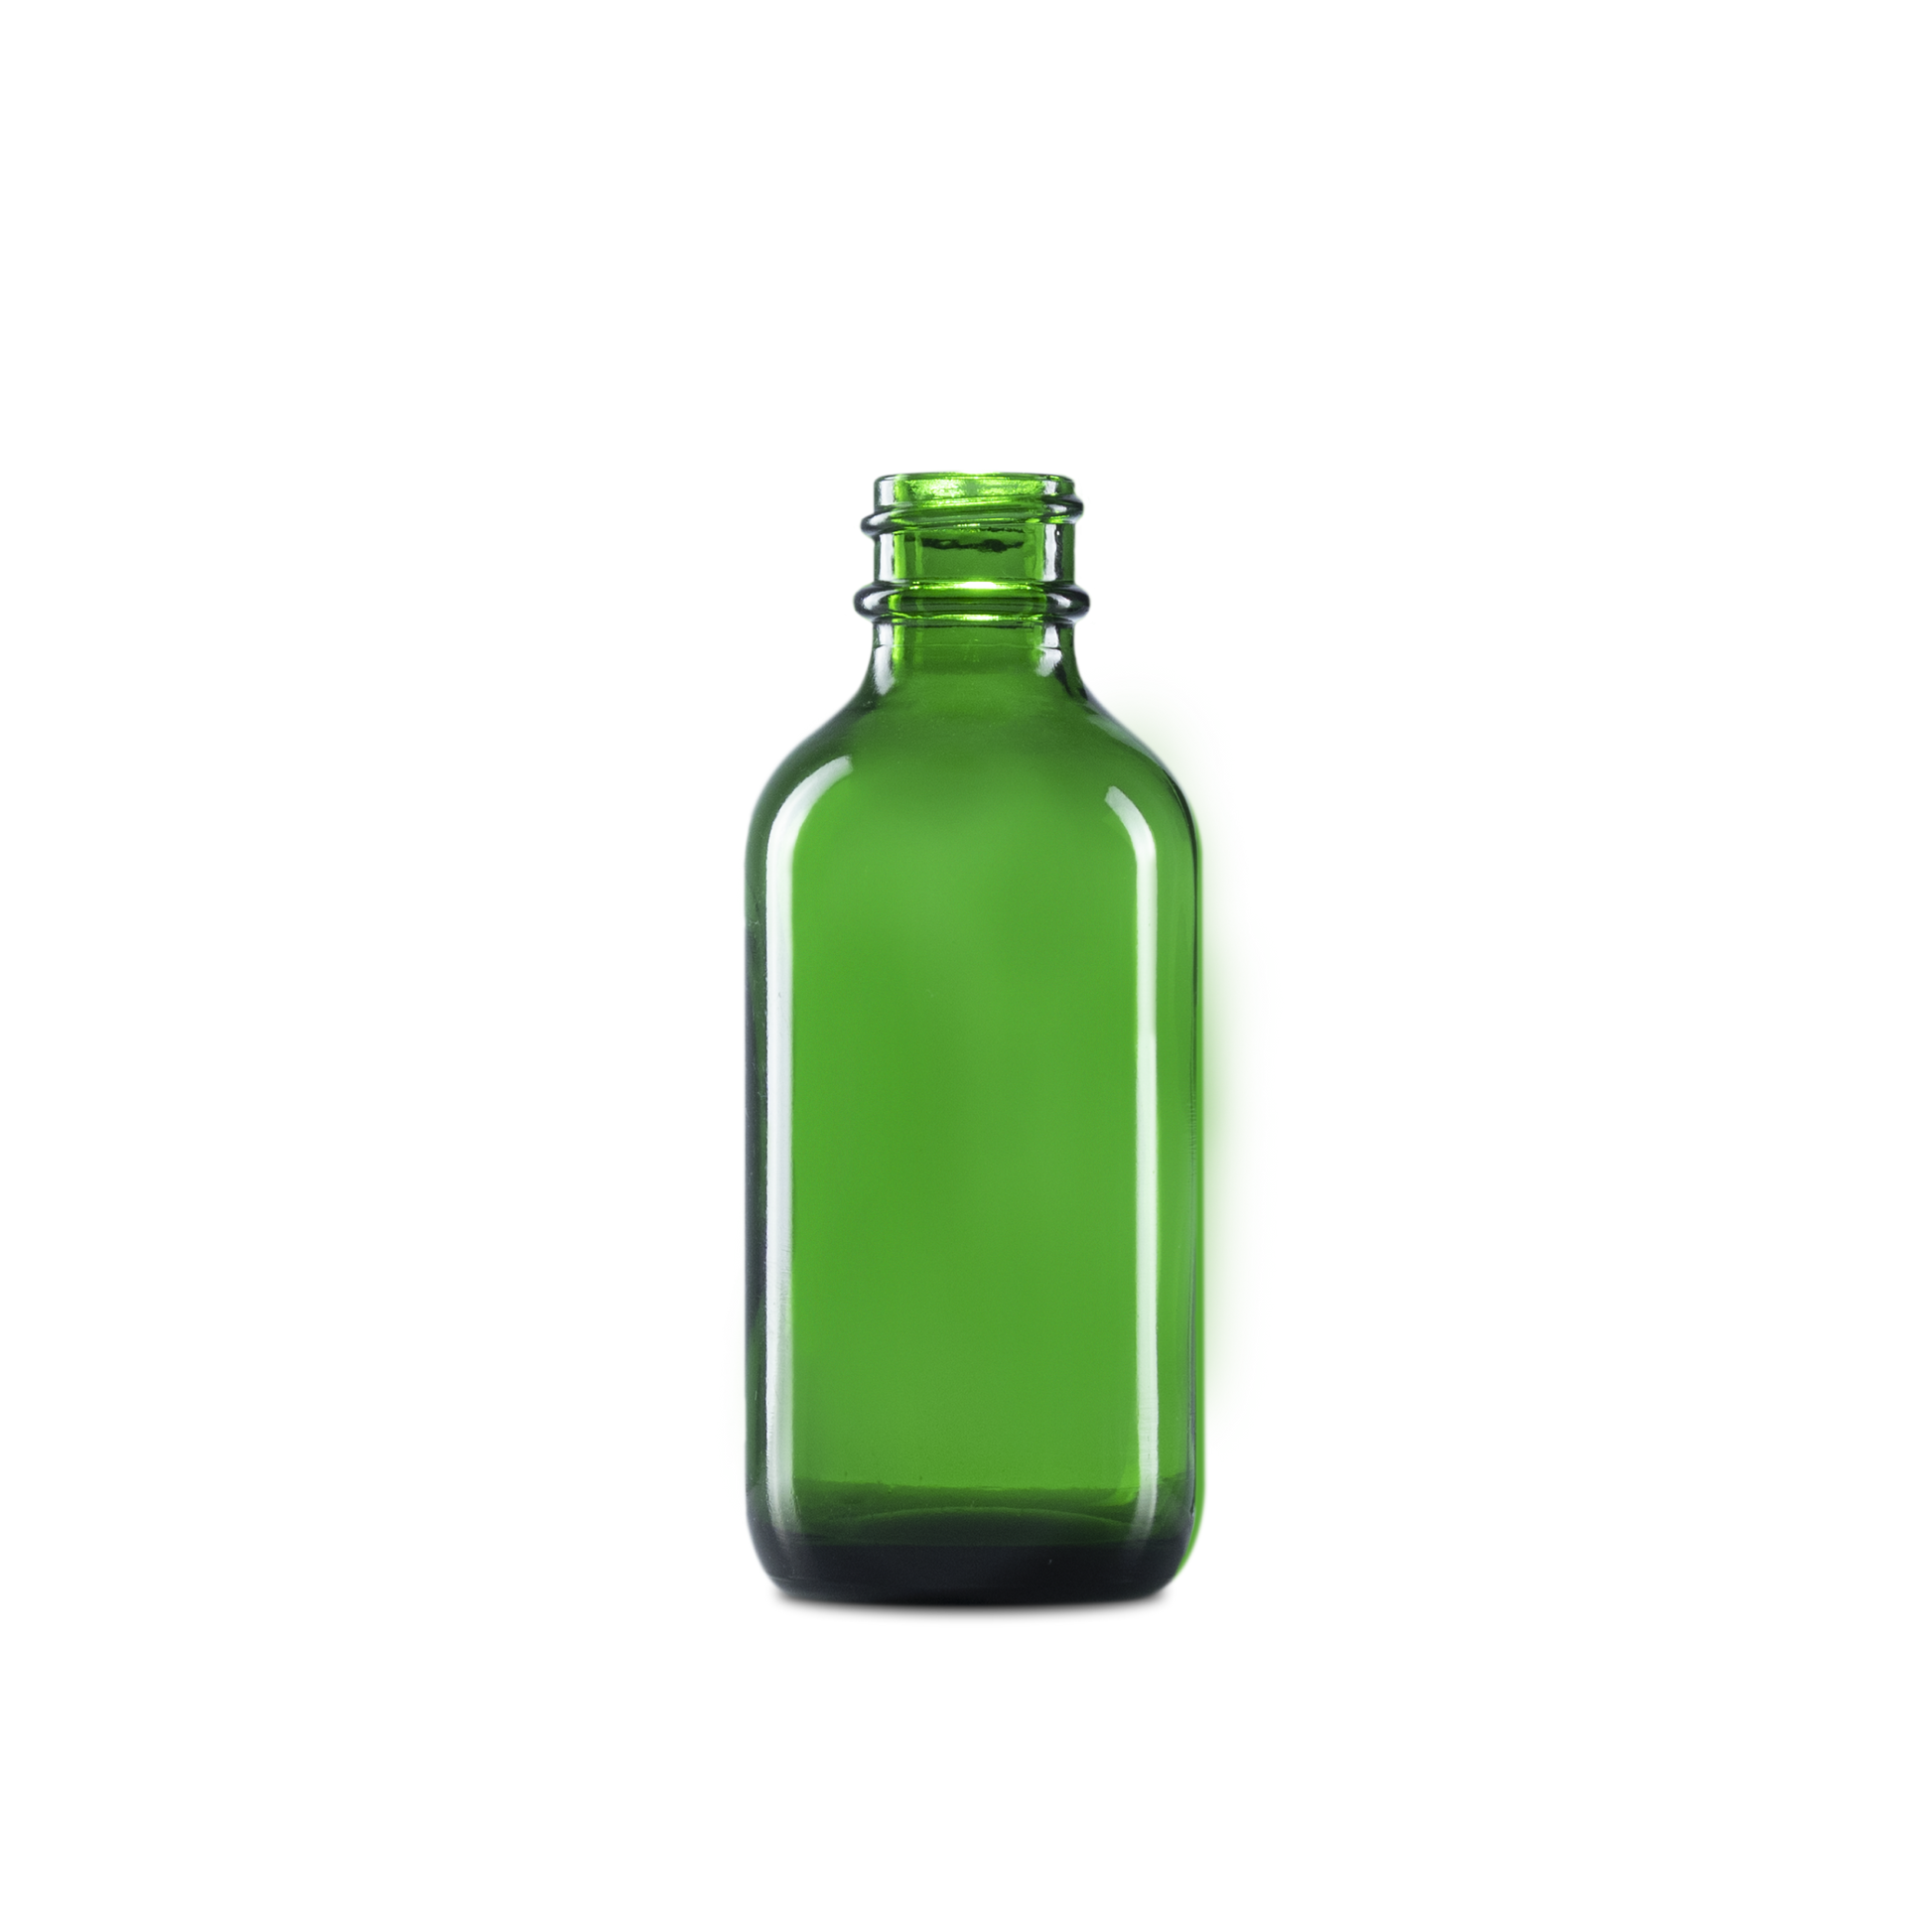 2 oz green glass bottle is the perfect container for your pharmaceuticals. this bottle is made of glass and has a clear and round body.